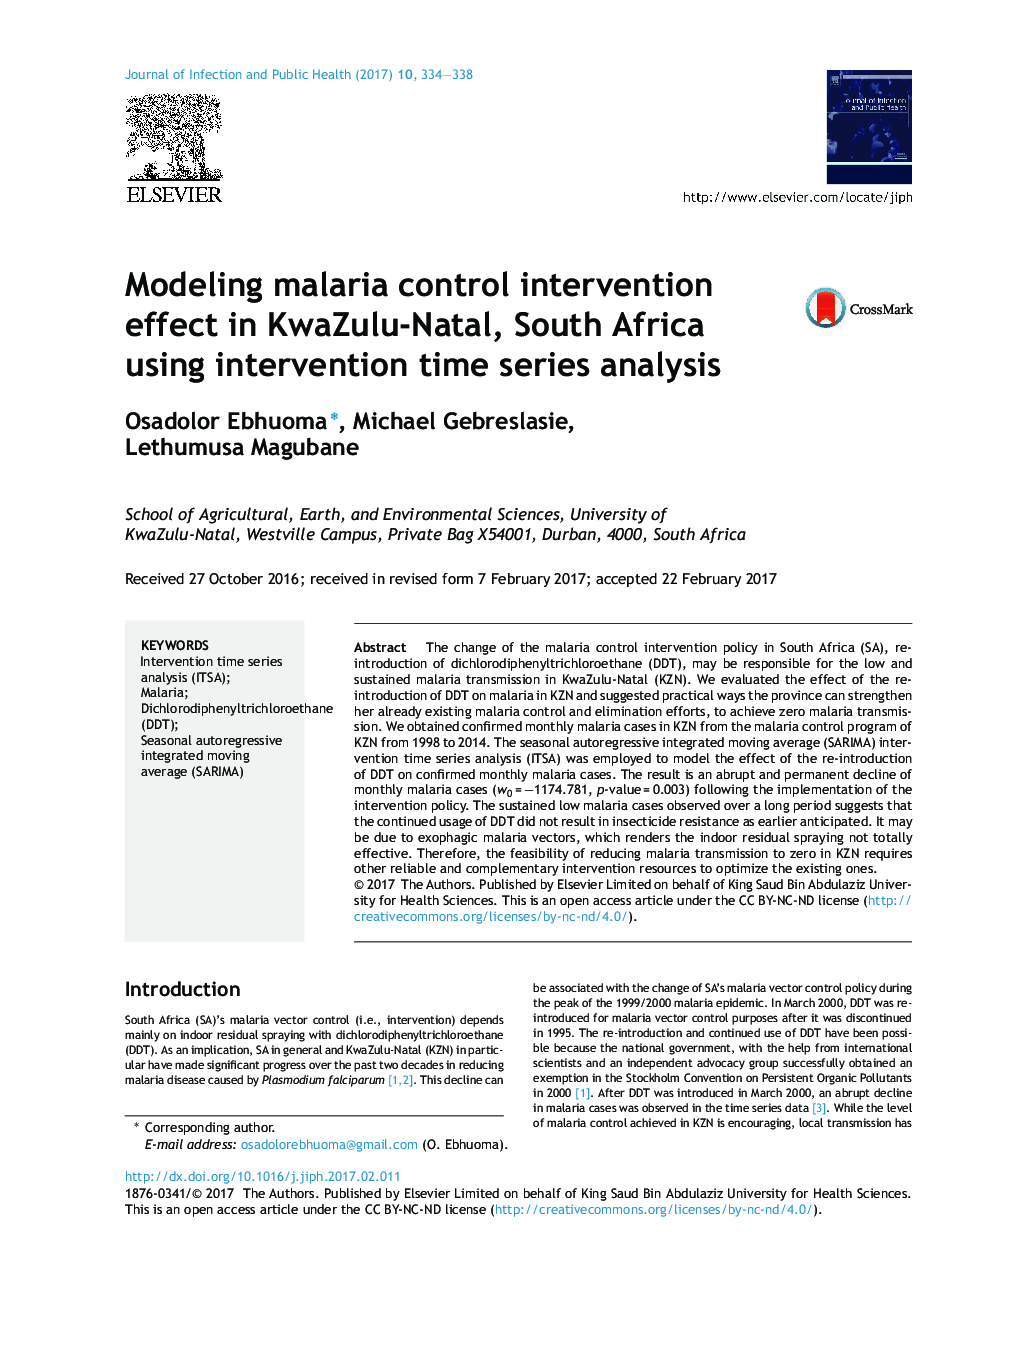 Modeling malaria control intervention effect in KwaZulu-Natal, South Africa using intervention time series analysis